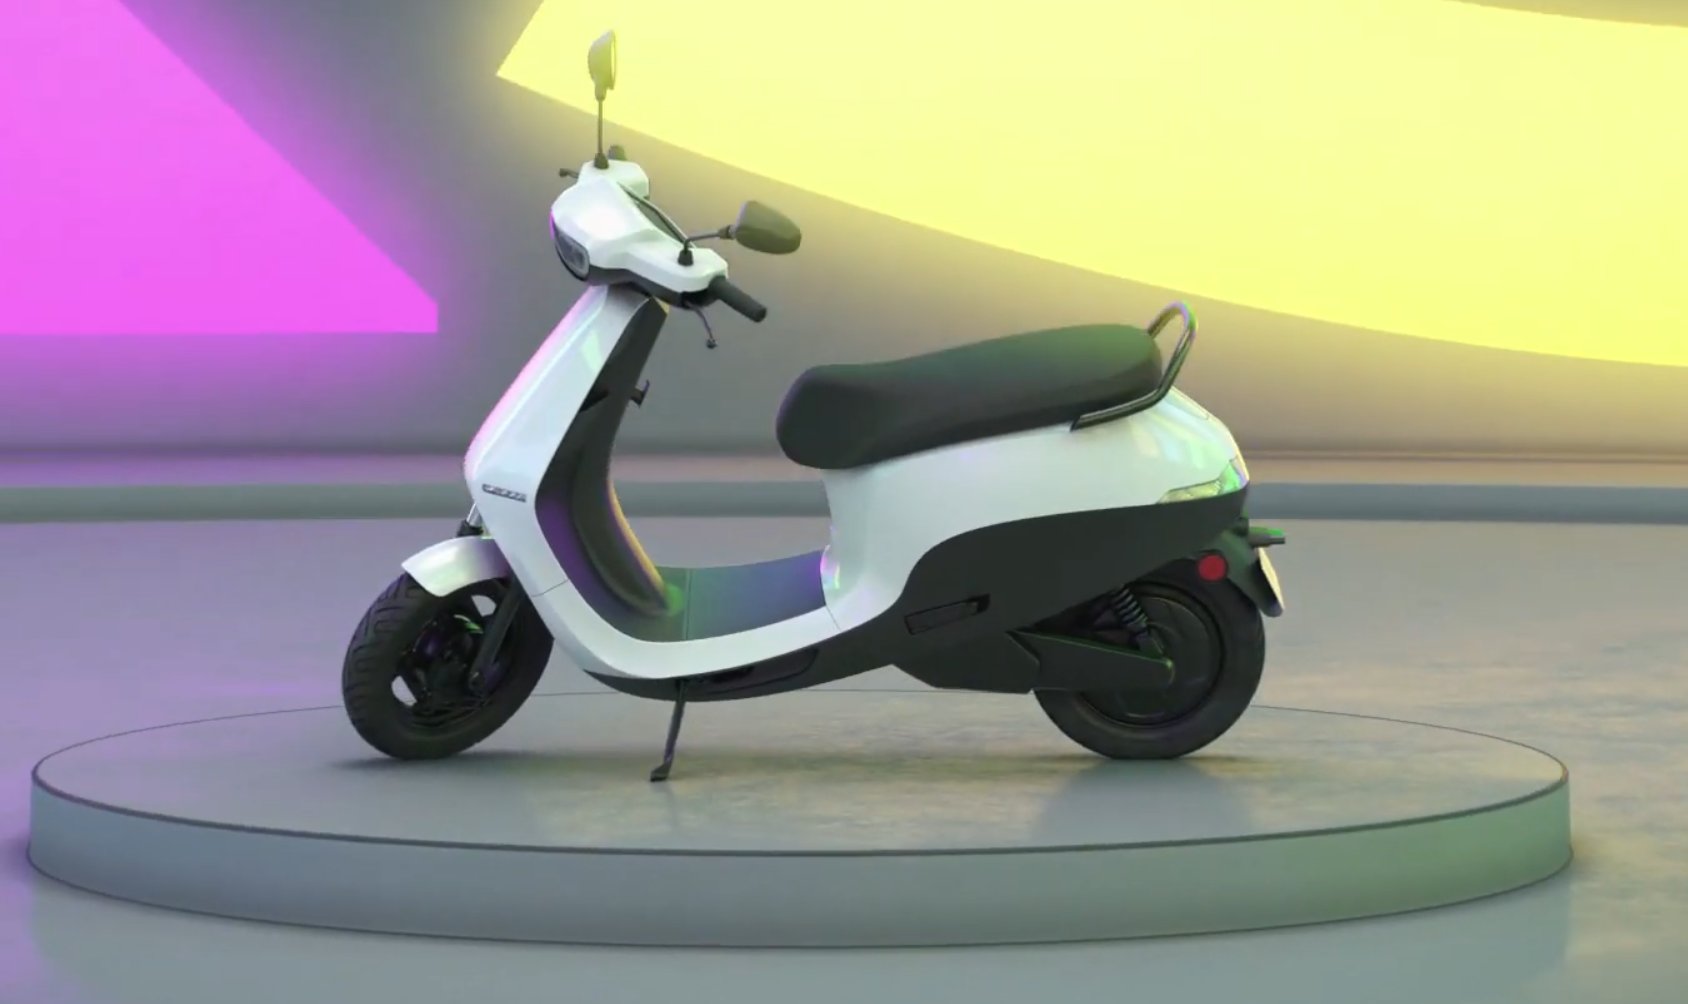 Ola Electric is set to take on the Honda Activa, the company will bring an all-new E-Scooter at a low cost